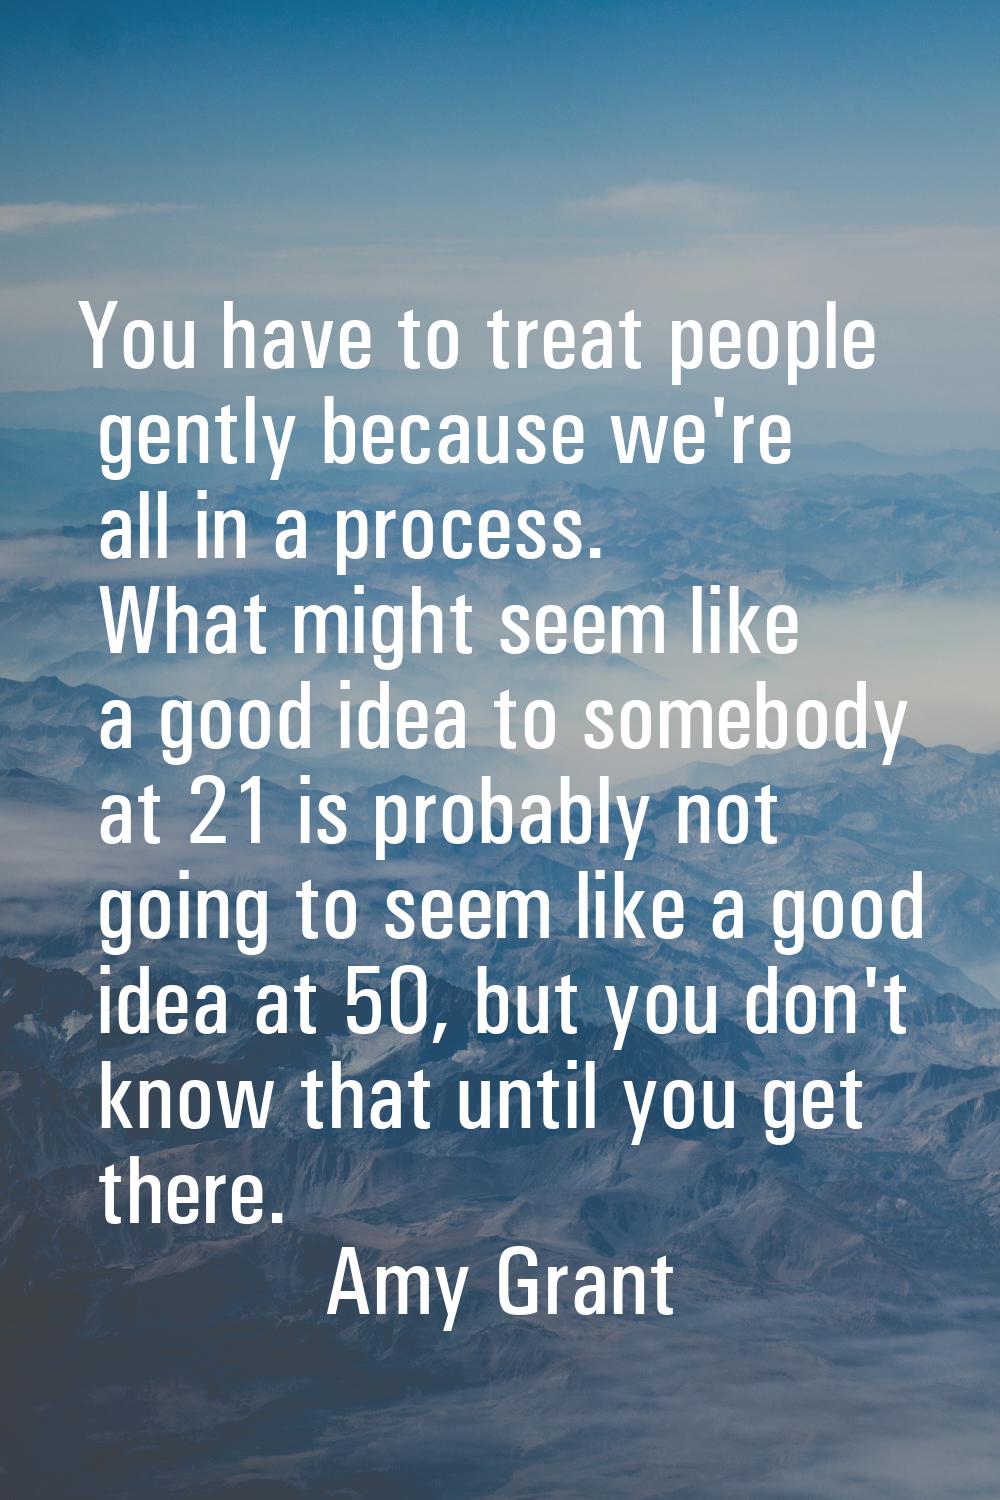 You have to treat people gently because we're all in a process. What might seem like a good idea to